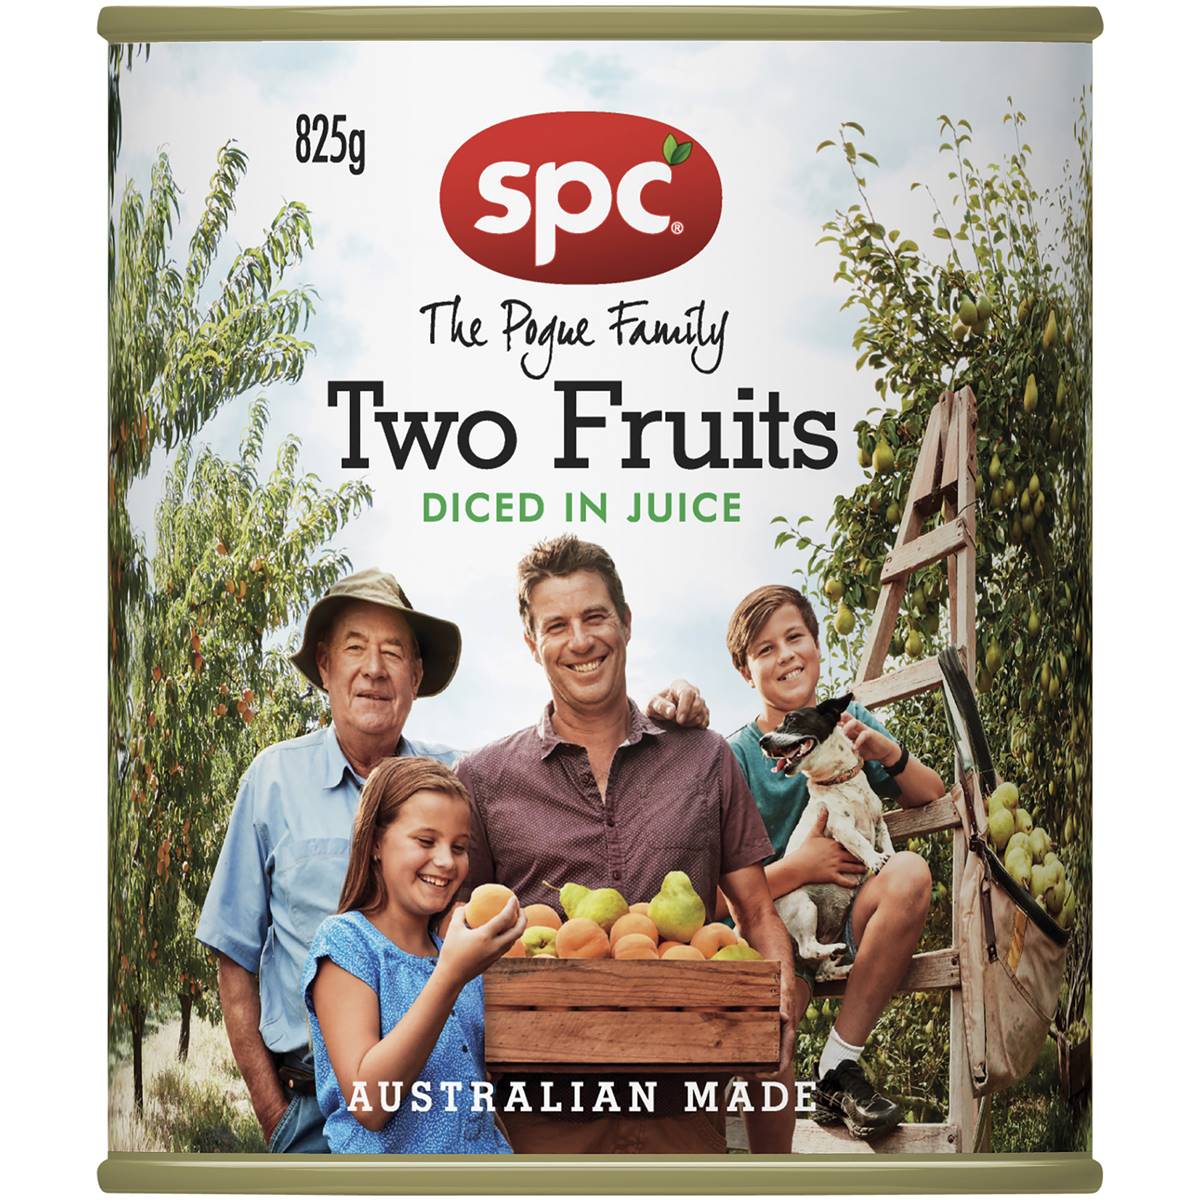 Calories in Spc Two Fruits Diced In Juice Canned Fruit